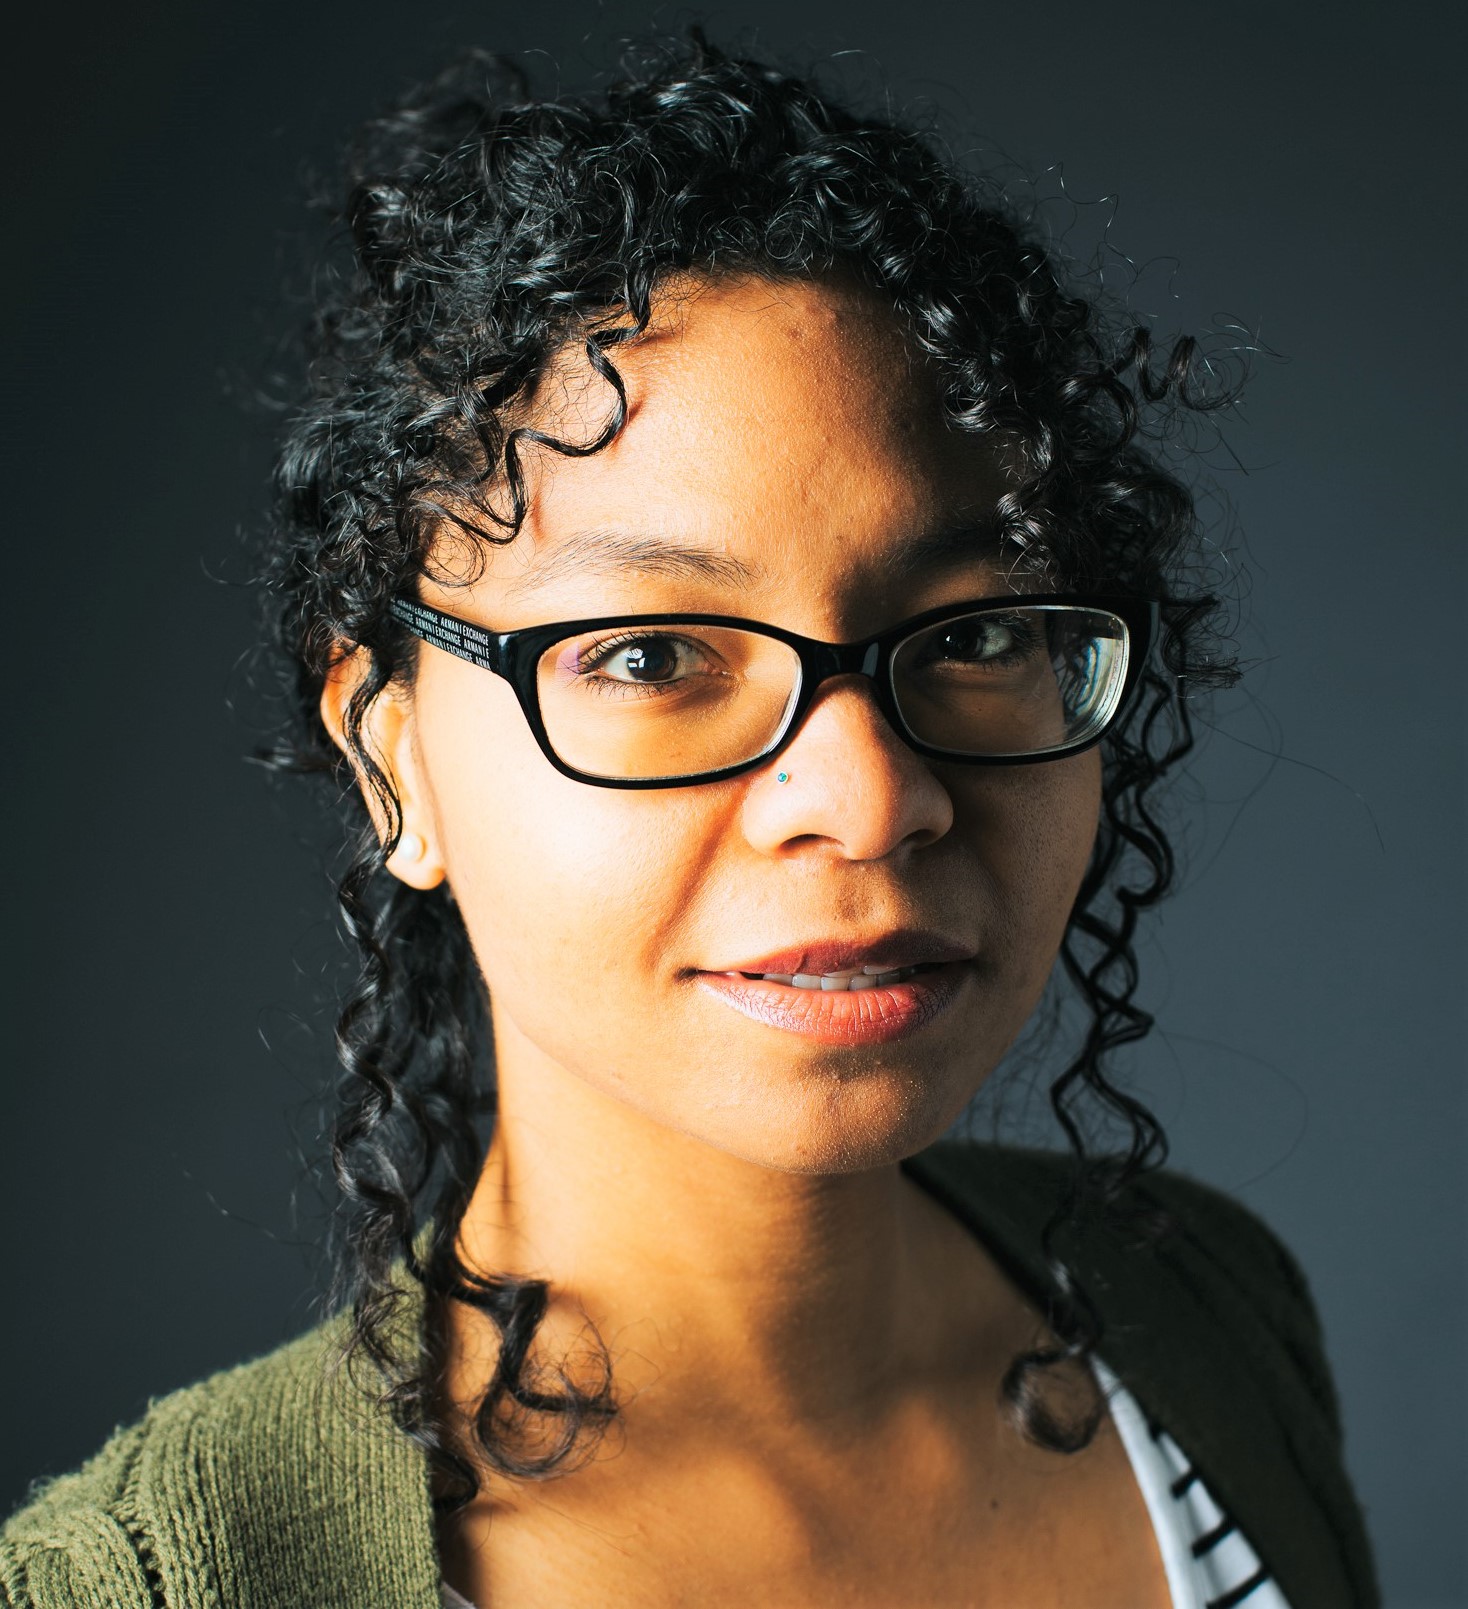 brown-skinned woman with curly brown hair and black glasses wearing a forest green cardigan and striped t-shirt